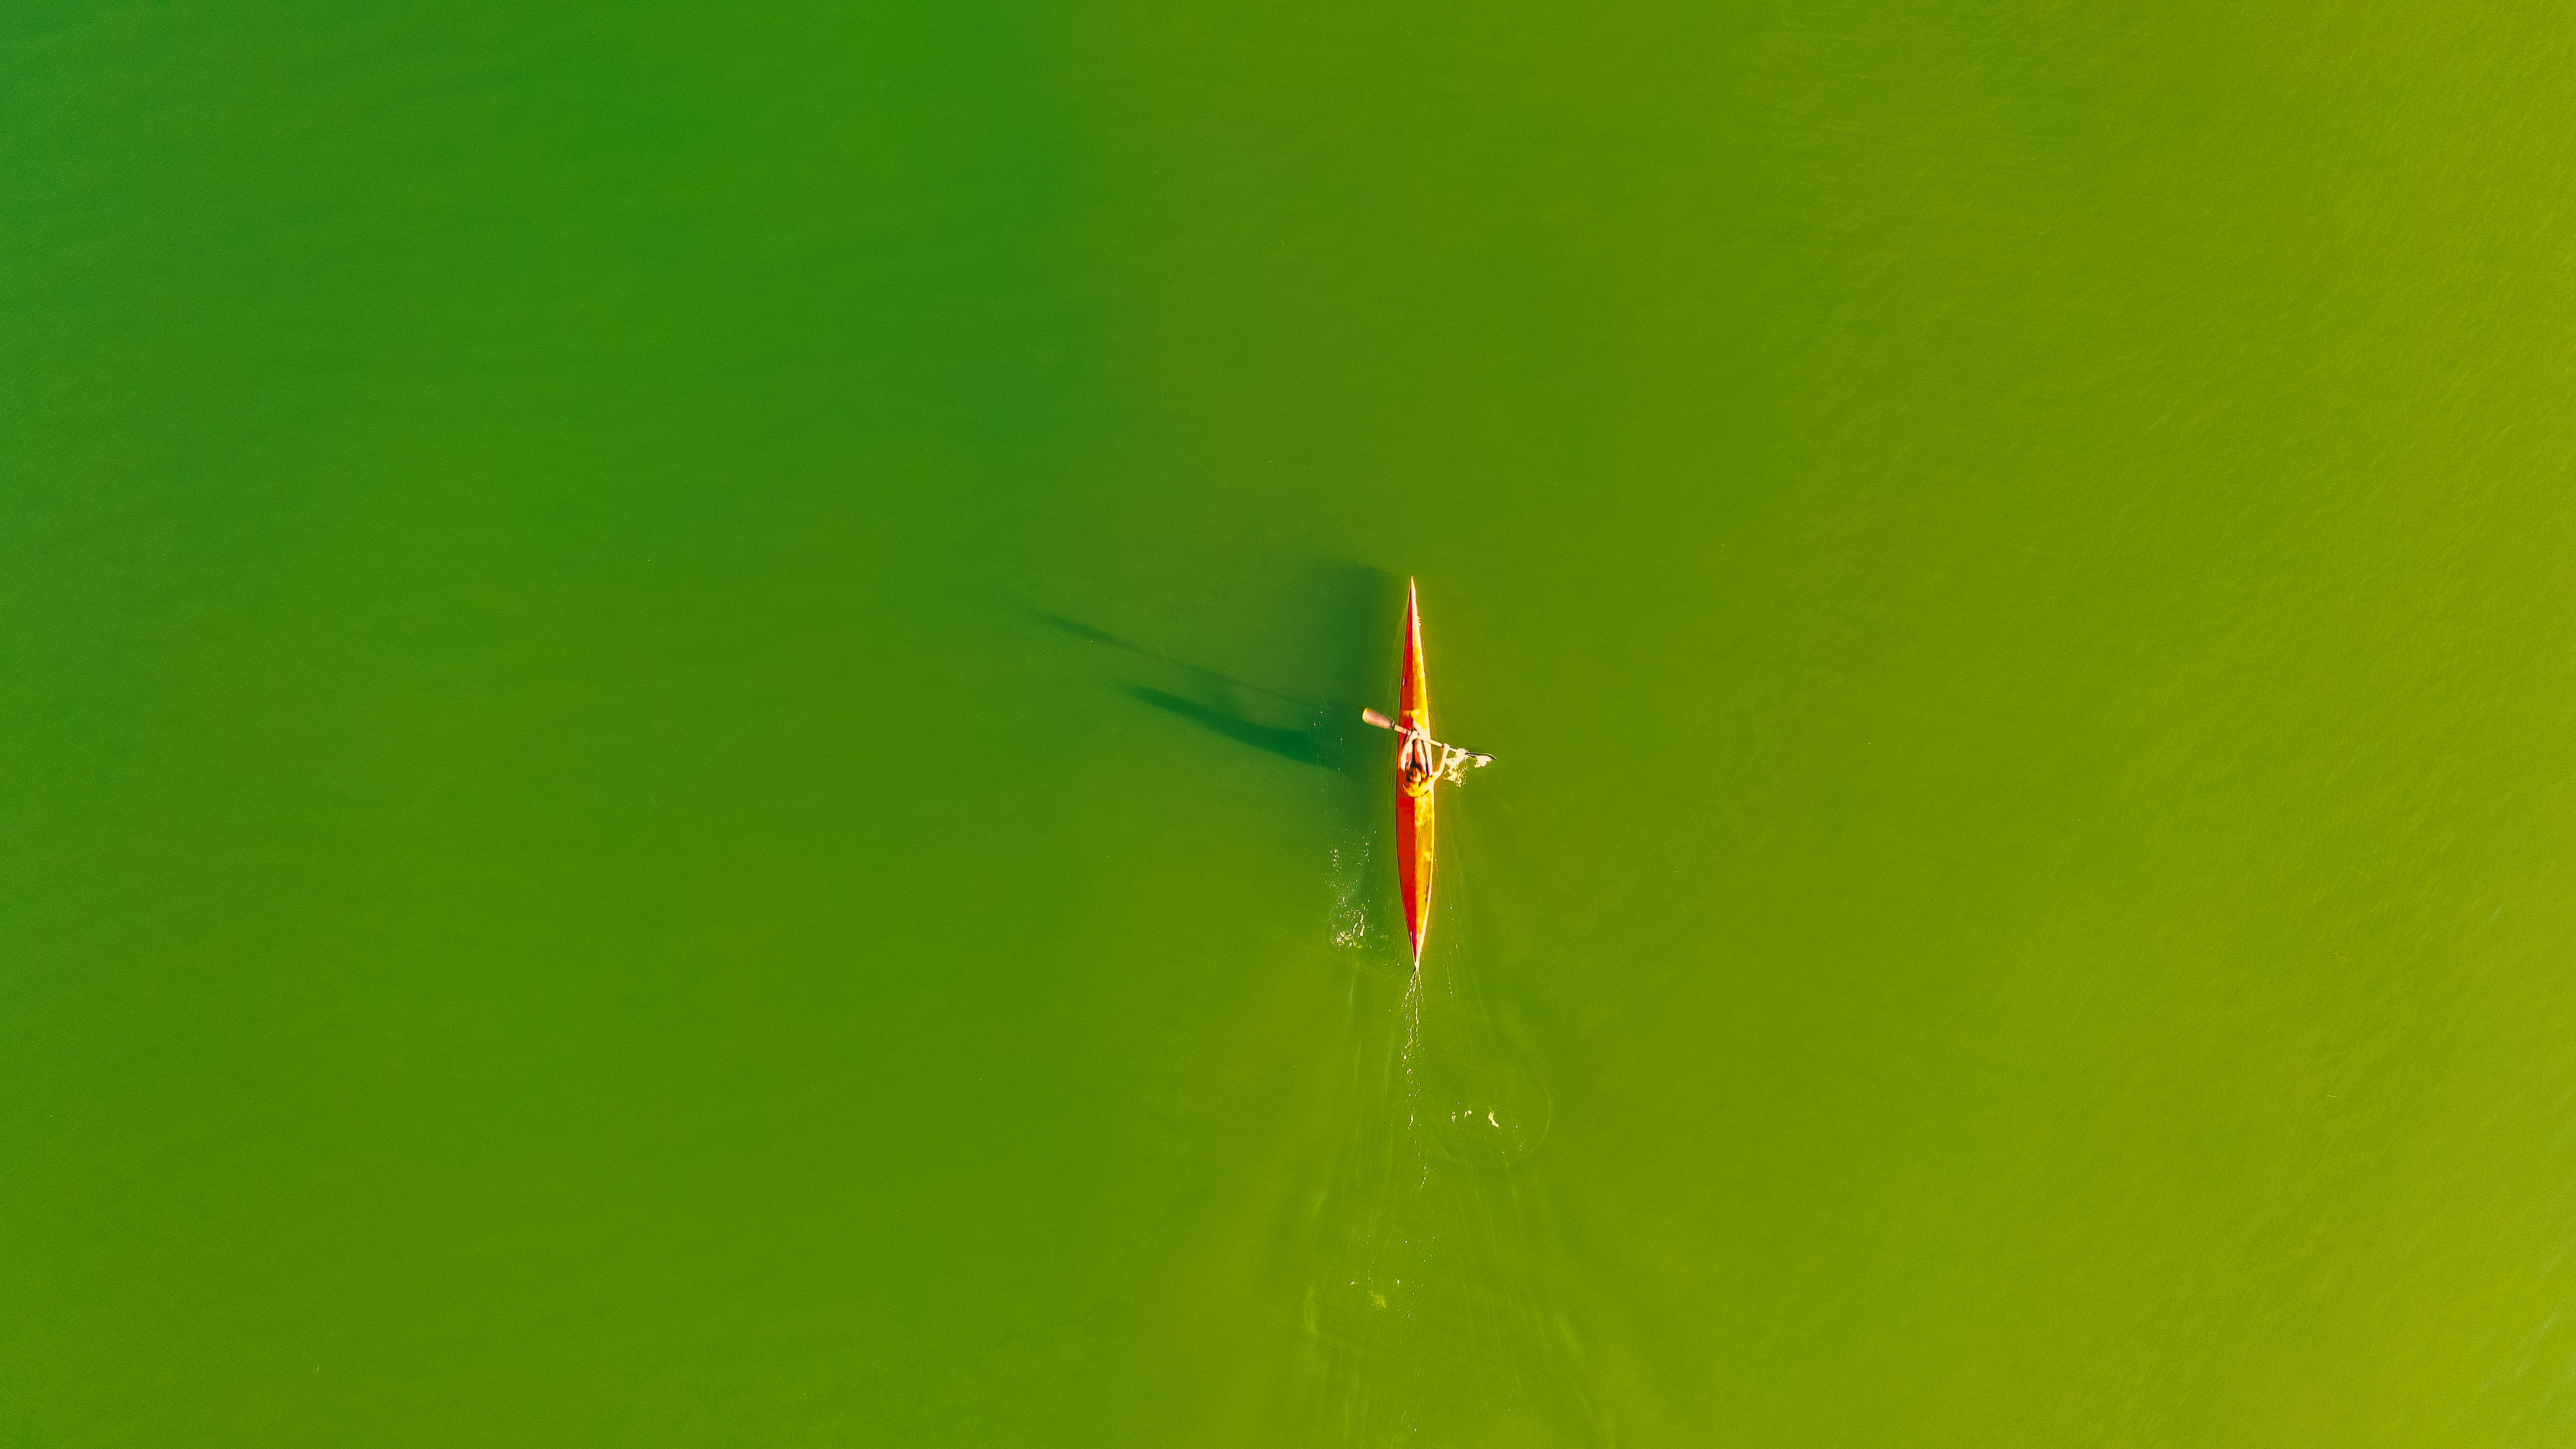 red and white dragonfly on green surface